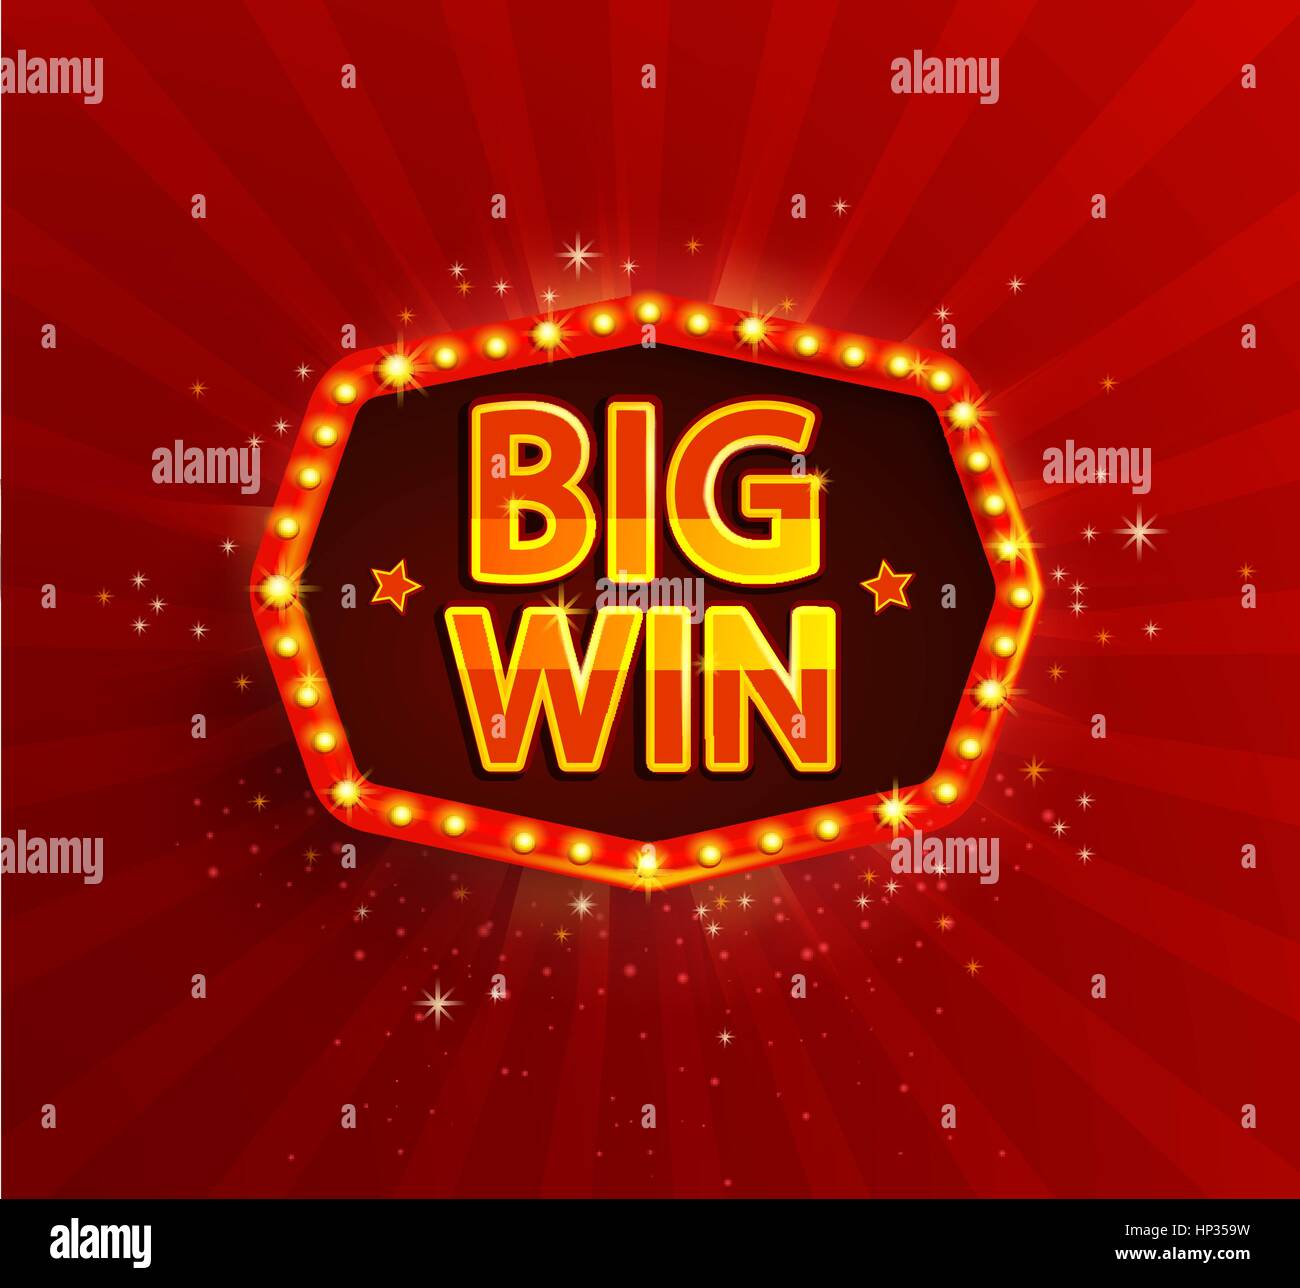 Big win retro banner with glowing lamps. Vector illustration for winners of poker, cards, roulette and lottery. Vintage light frame. Red background. Stock Vector